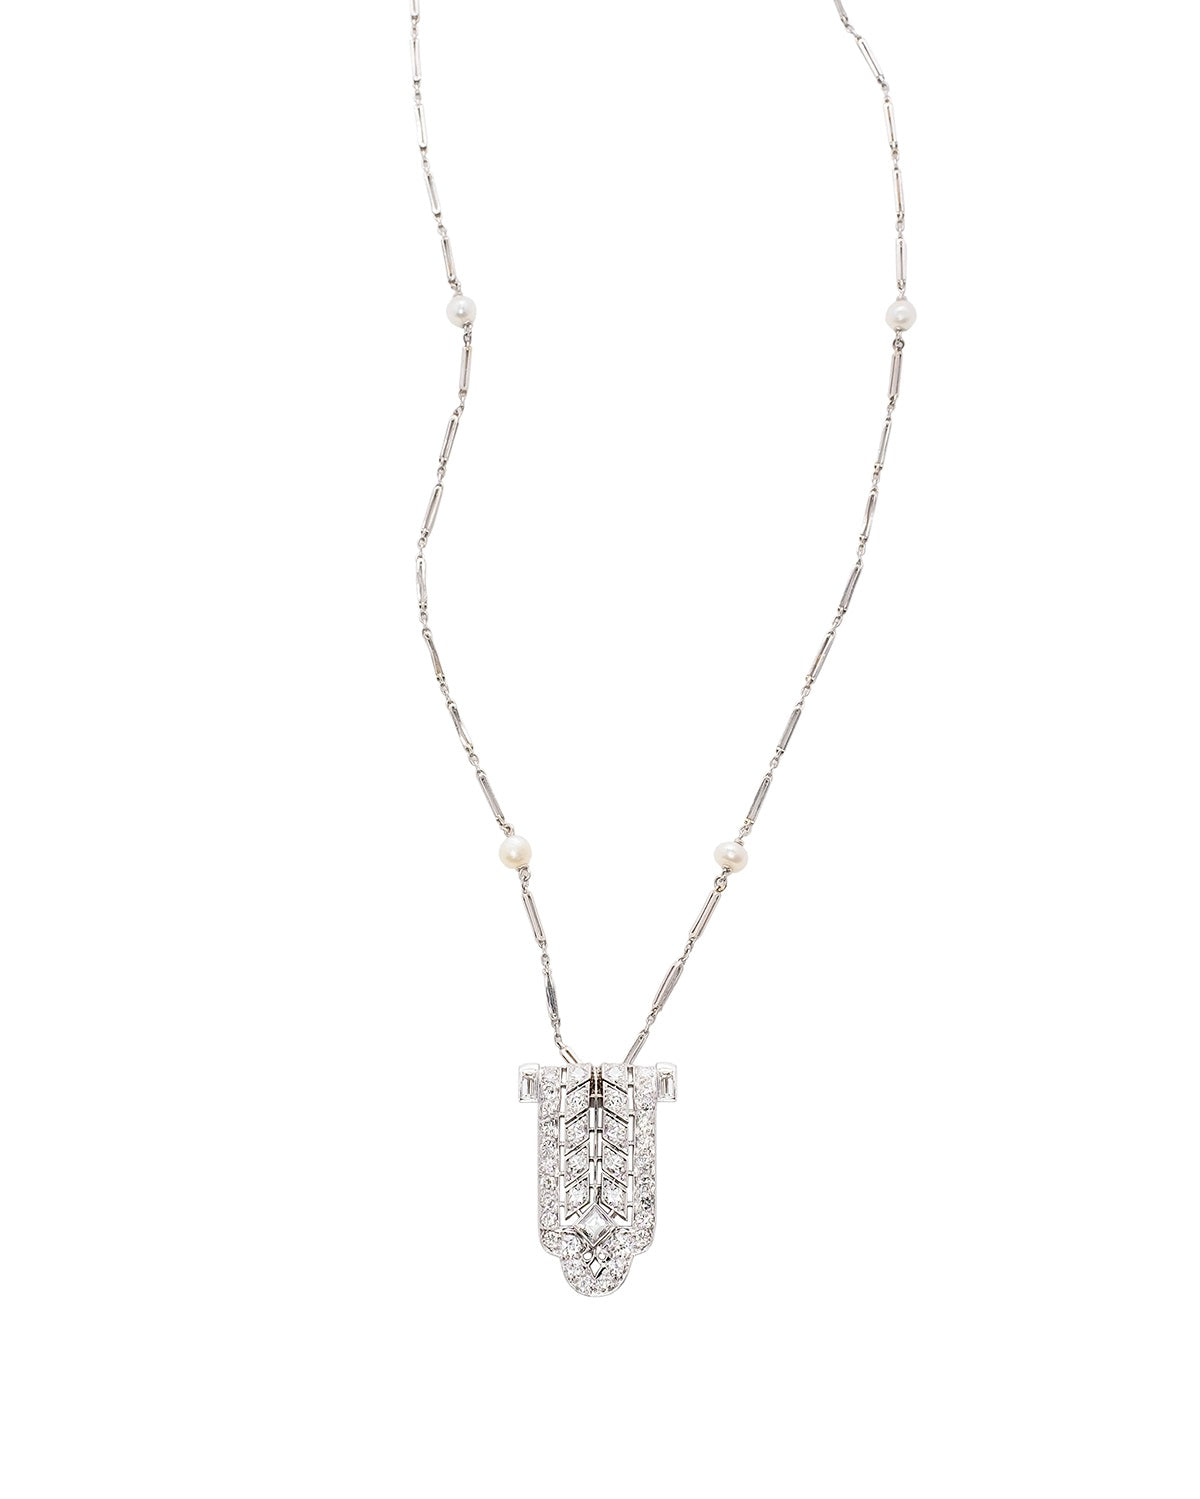 Art Deco Pendant in Platinum and Diamond with Pearl accents. 